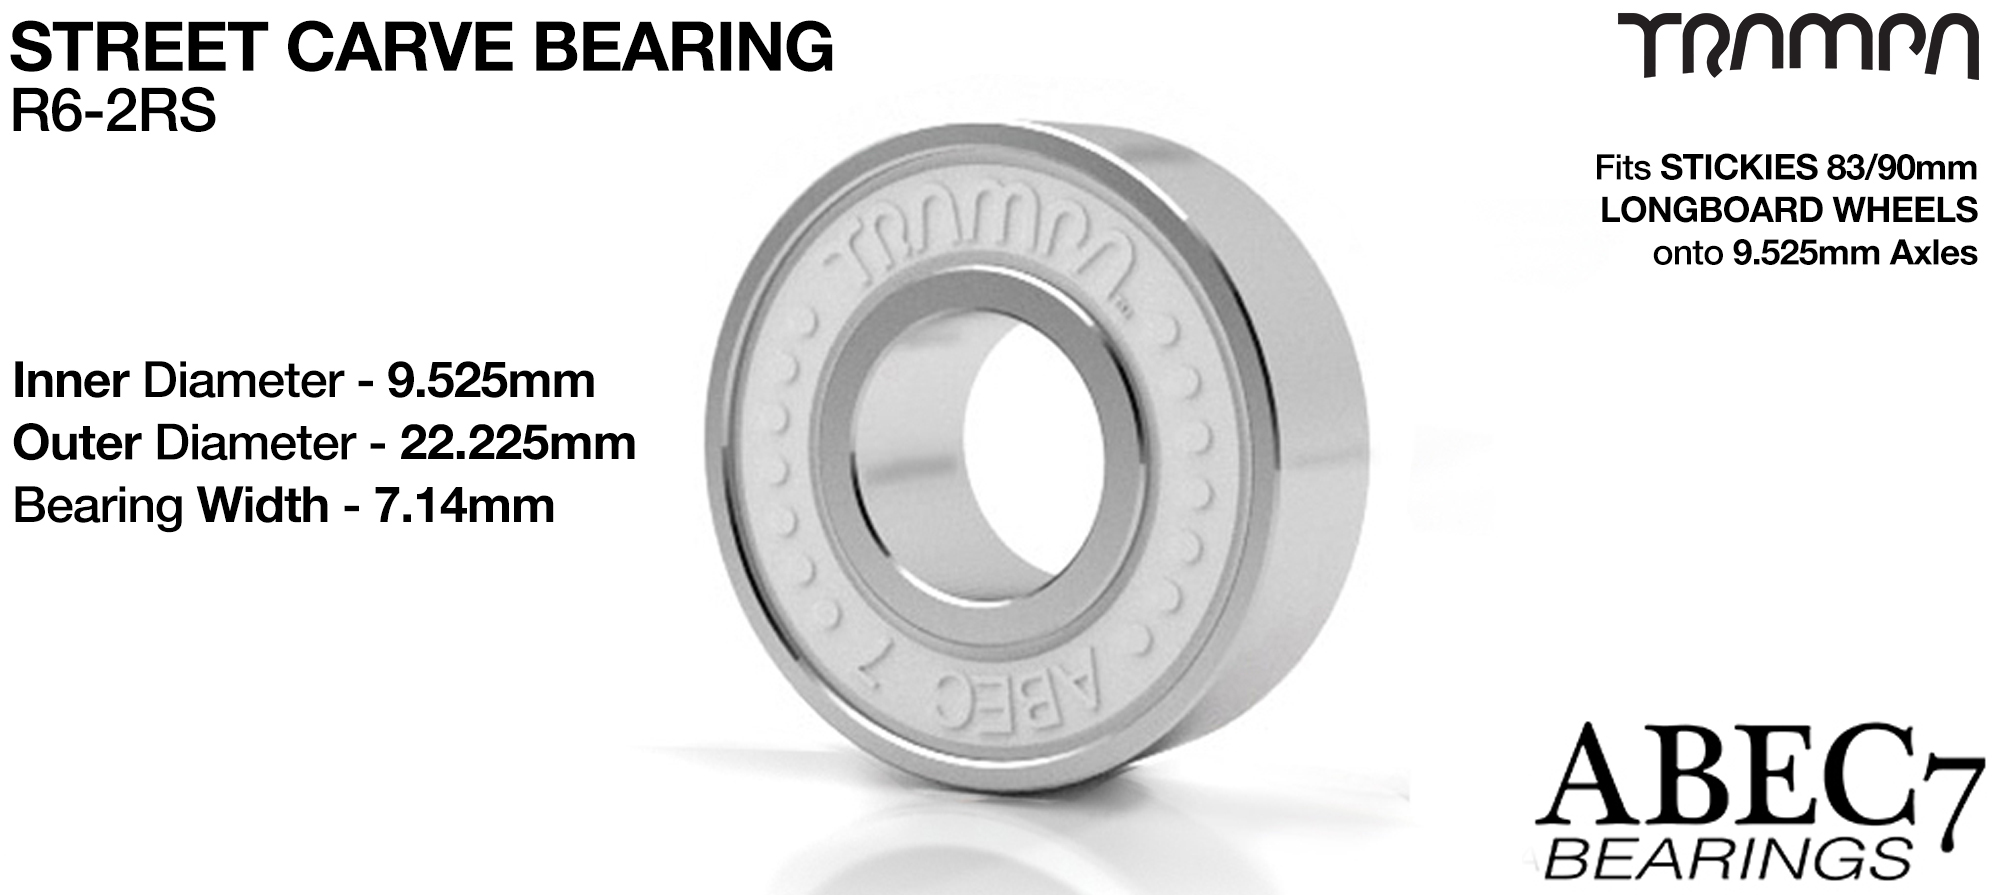 R6 2RS Abec 7 TRAMPA STREET CARVE Bearing used to fit STICKIES Longboard Wheels to 9.525mm Axels (9.525 x 22.225 x 7.14mm) - WHITE